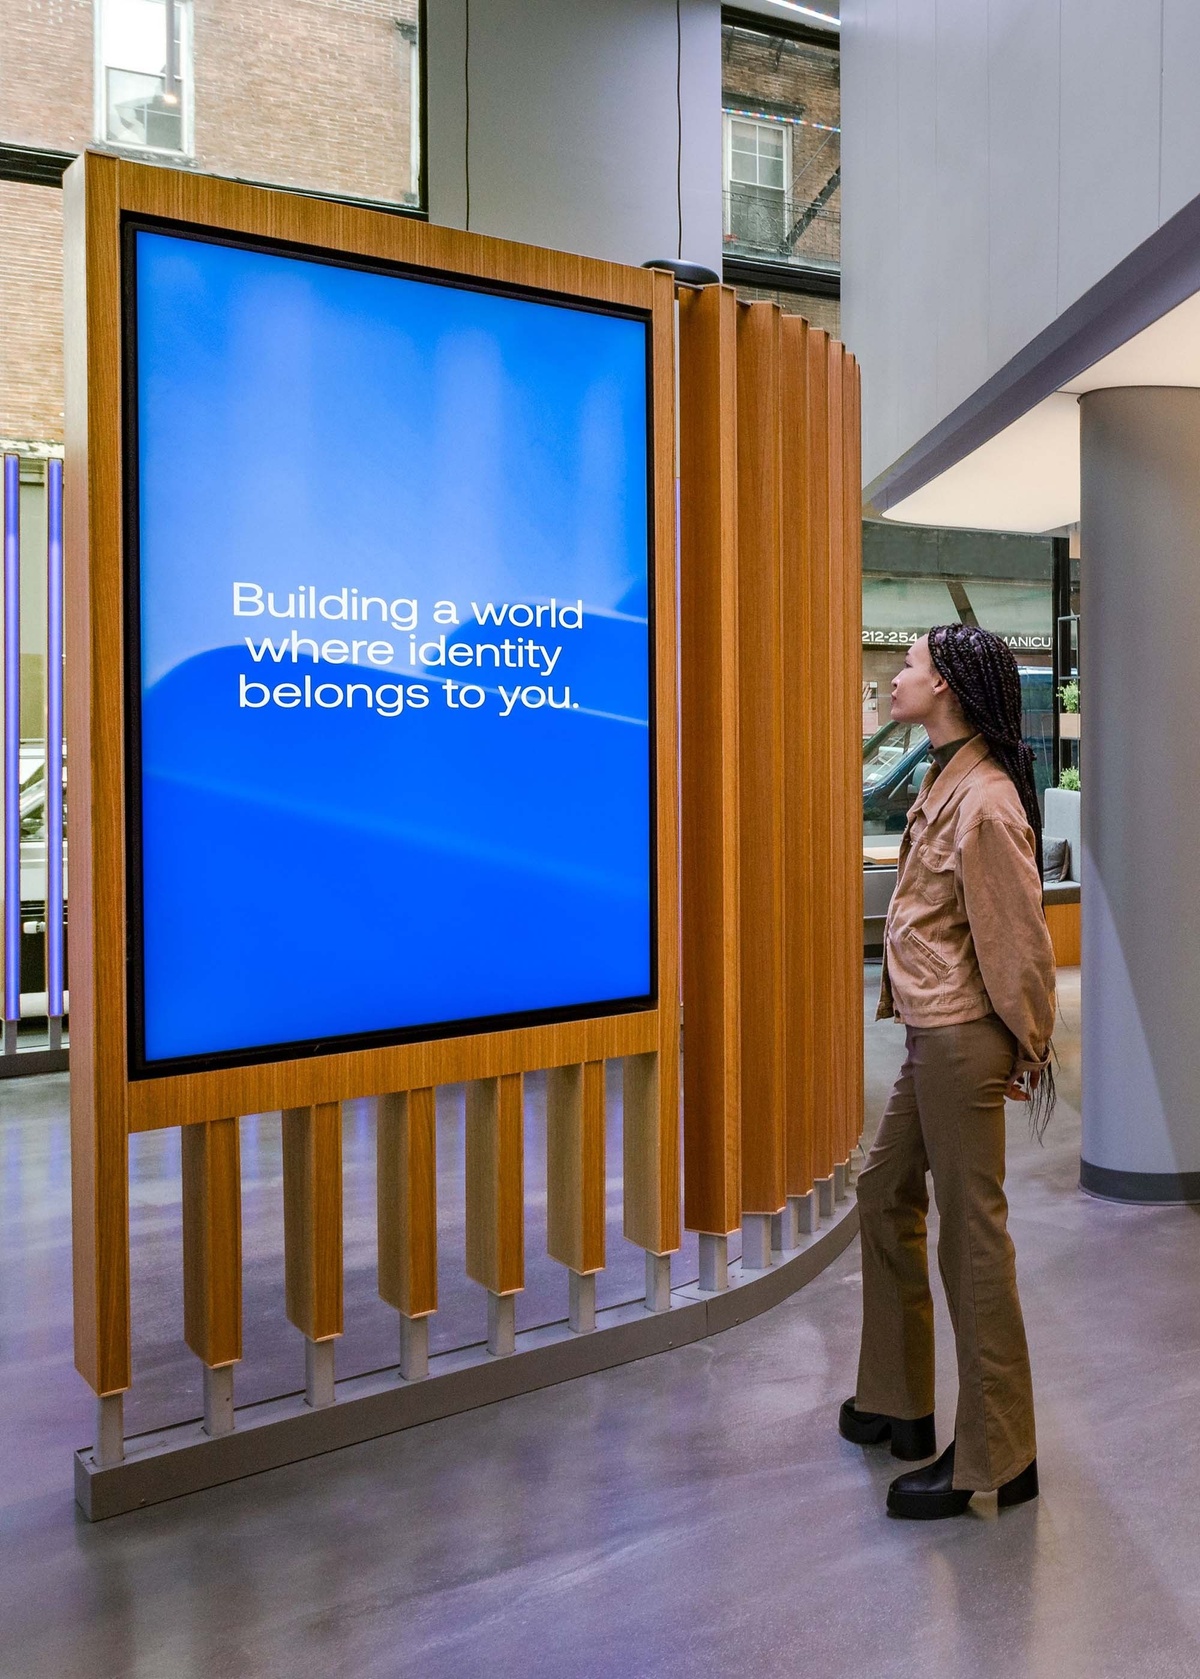 Young woman looking at content on digital screen on the installation that says "Building a world where identity belongs to you"